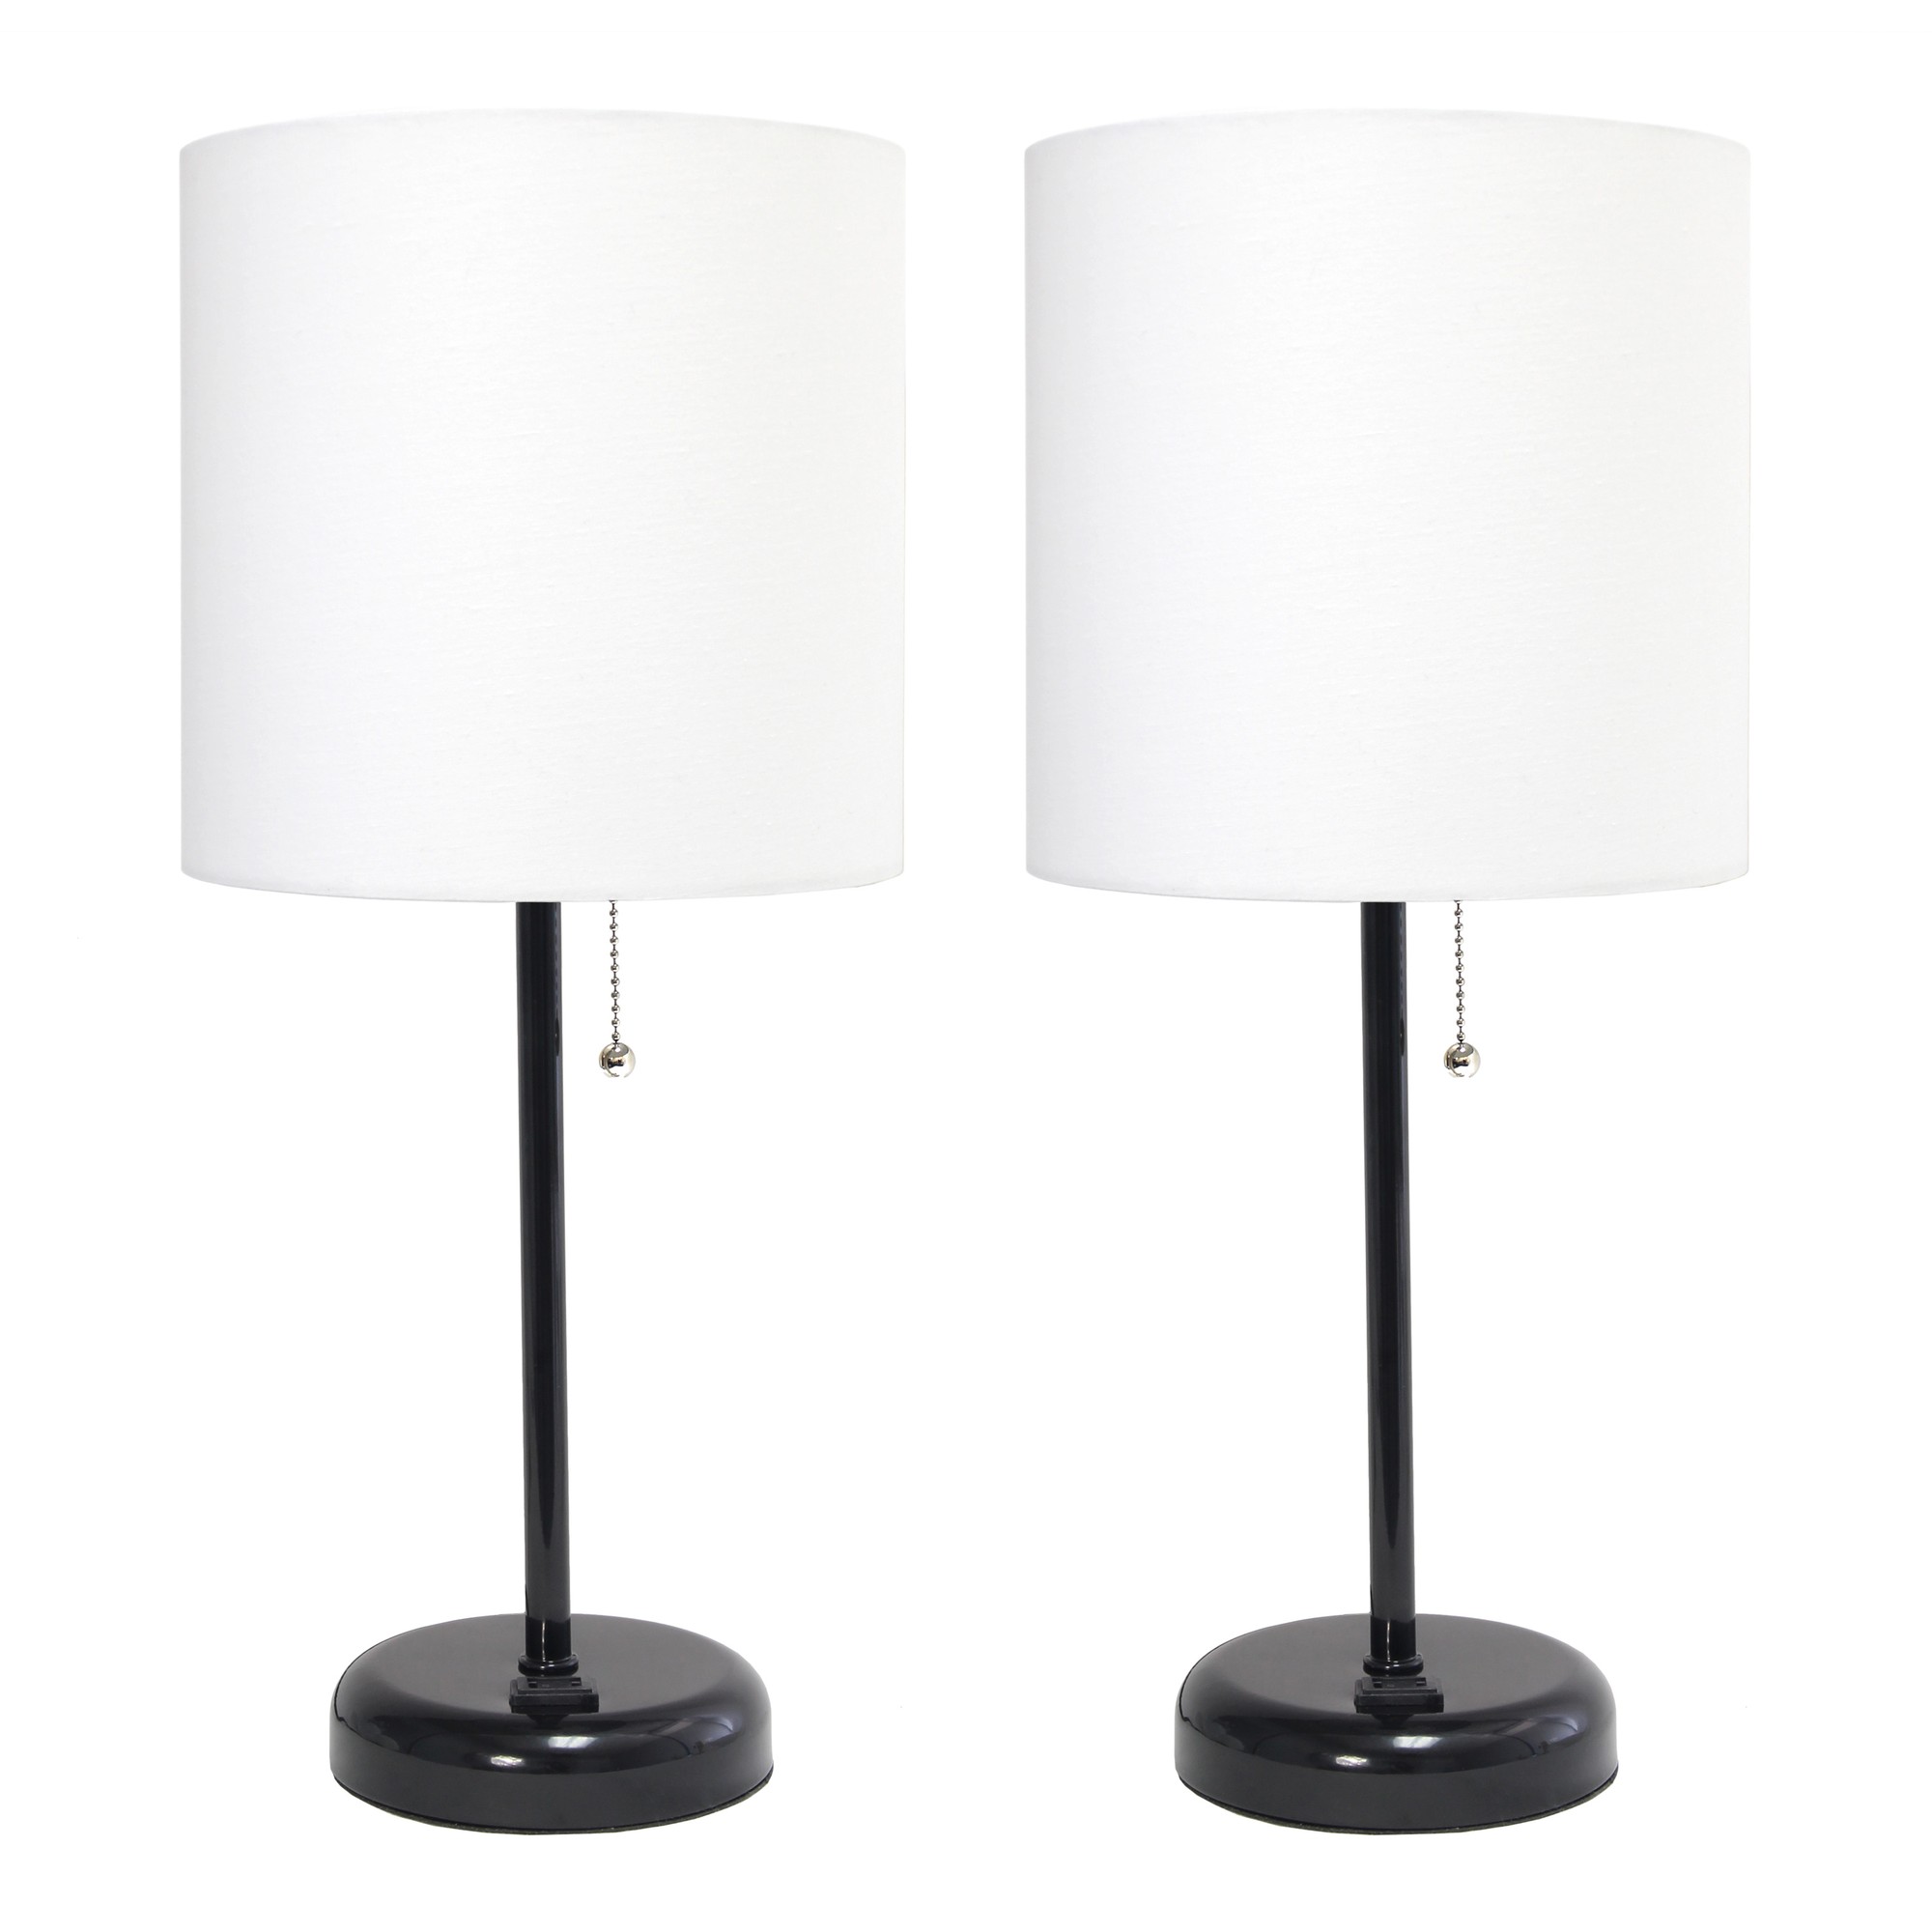 Simple Designs Black Stick Lamp with Charging Outlet and Fabric Shade 2 Pack Set, White